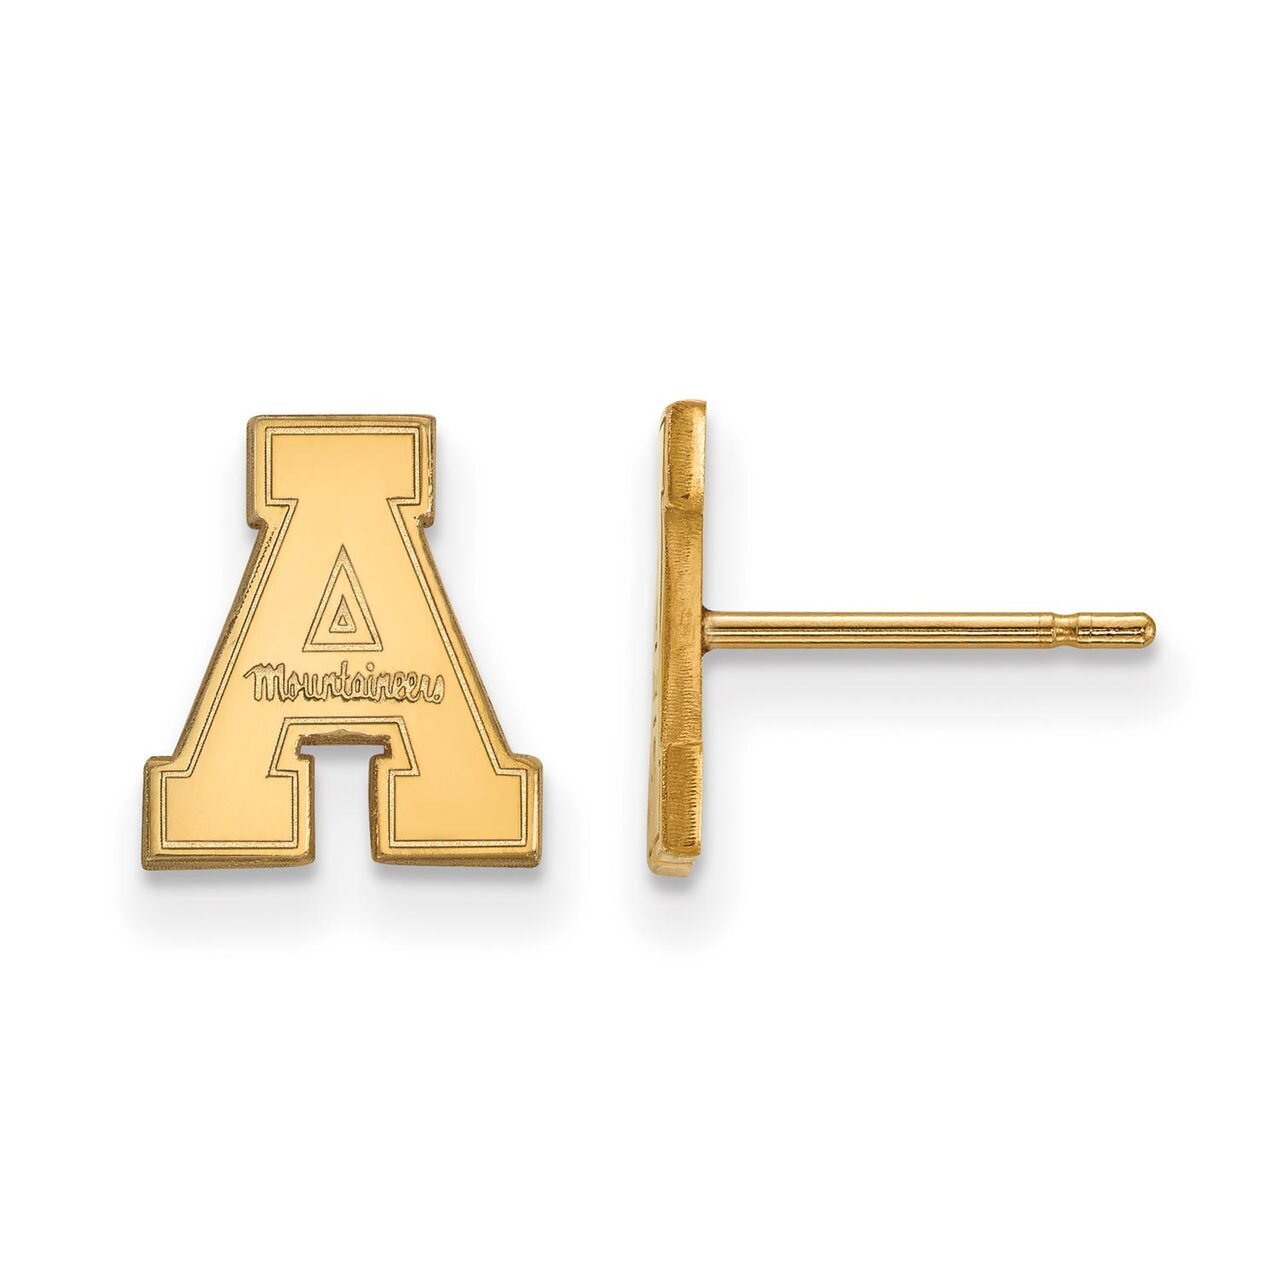 Appalachian State University x-Small Post Earring Gold-plated Silver GP007APS